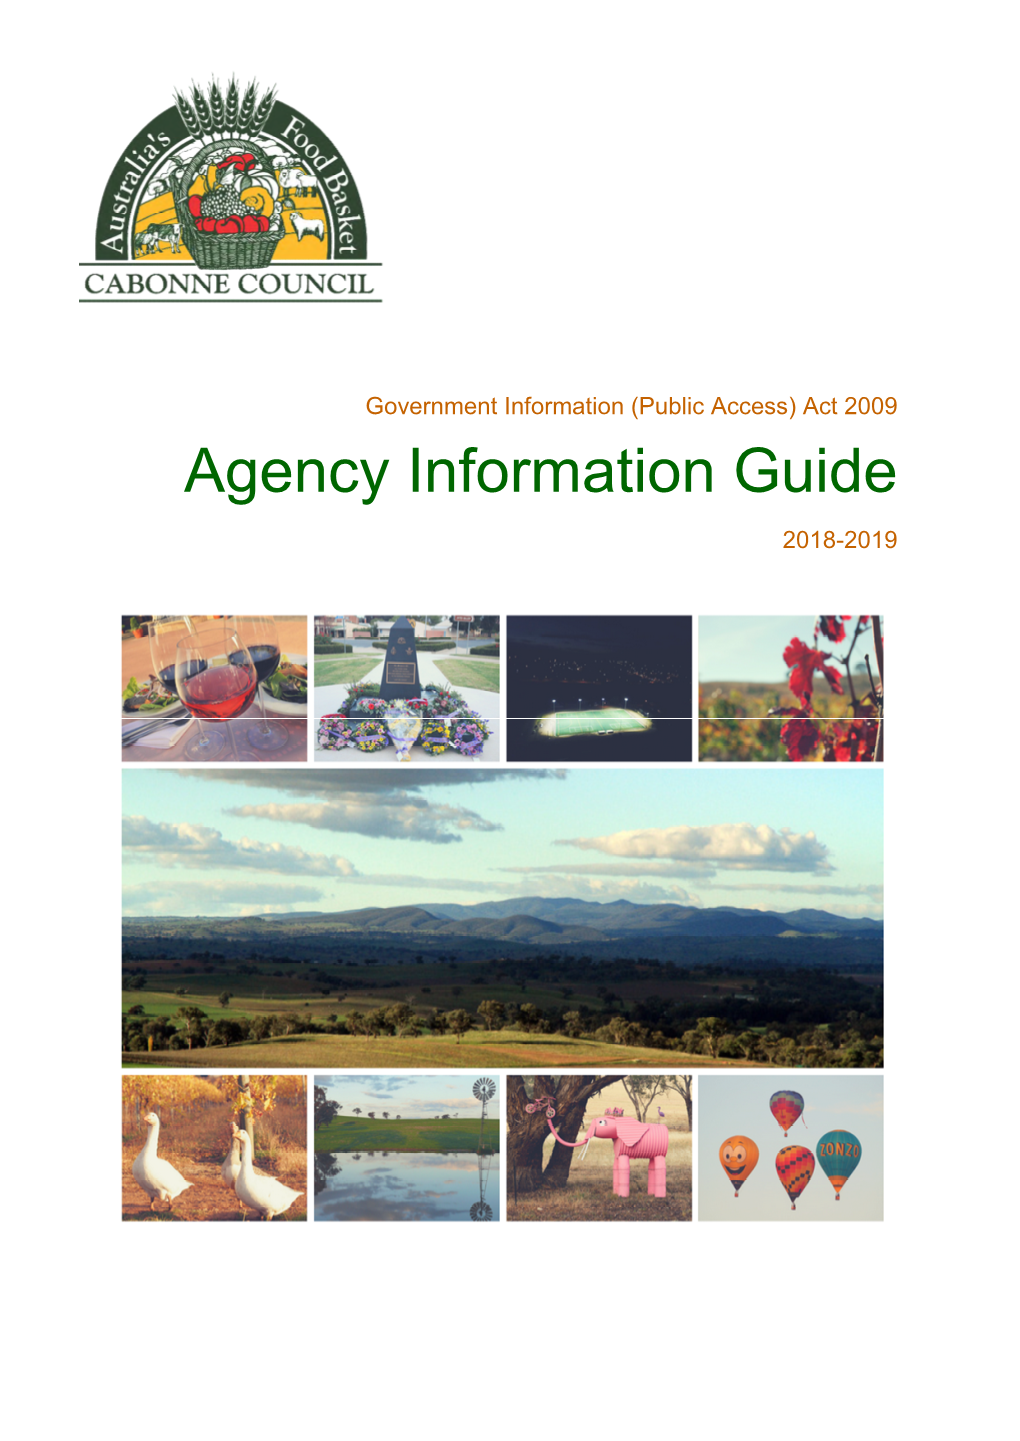 Agency Information Guide 2018-2019